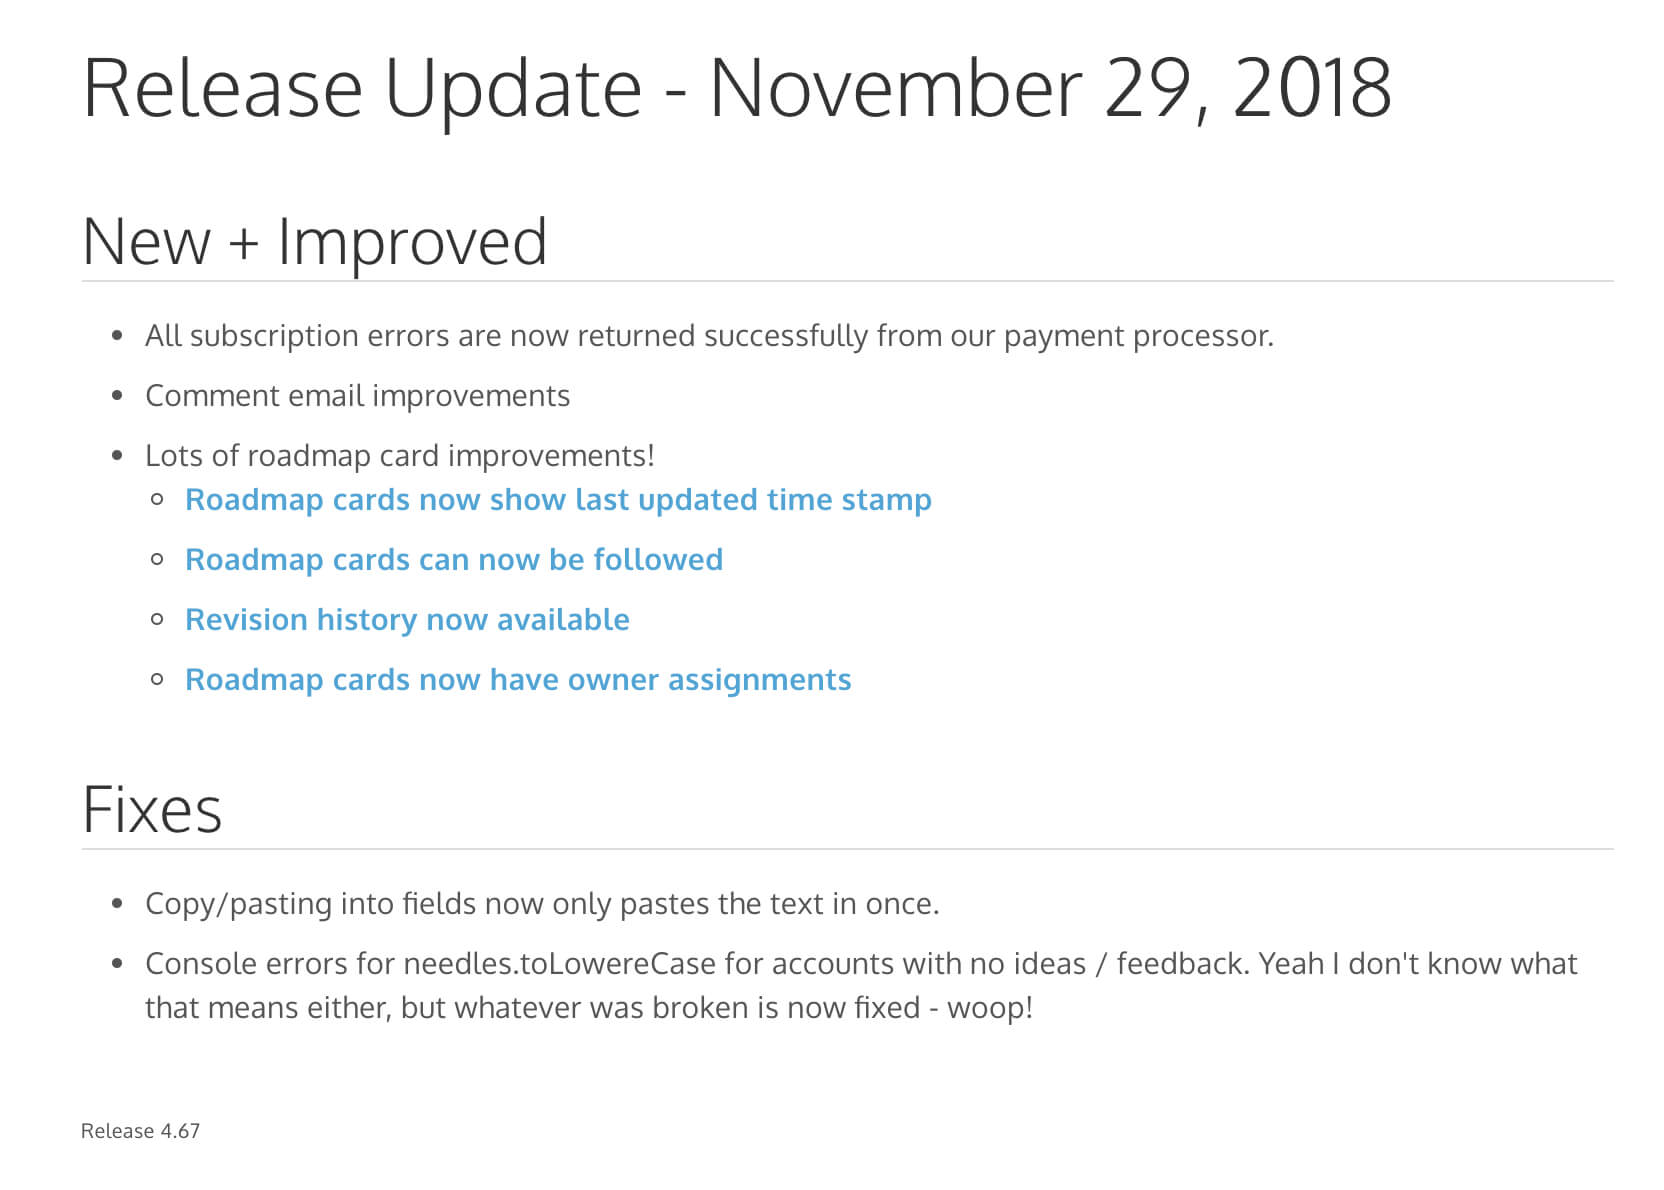 How To Write Great Release Notes | Prodpad Intended For Software Release Notes Template Word